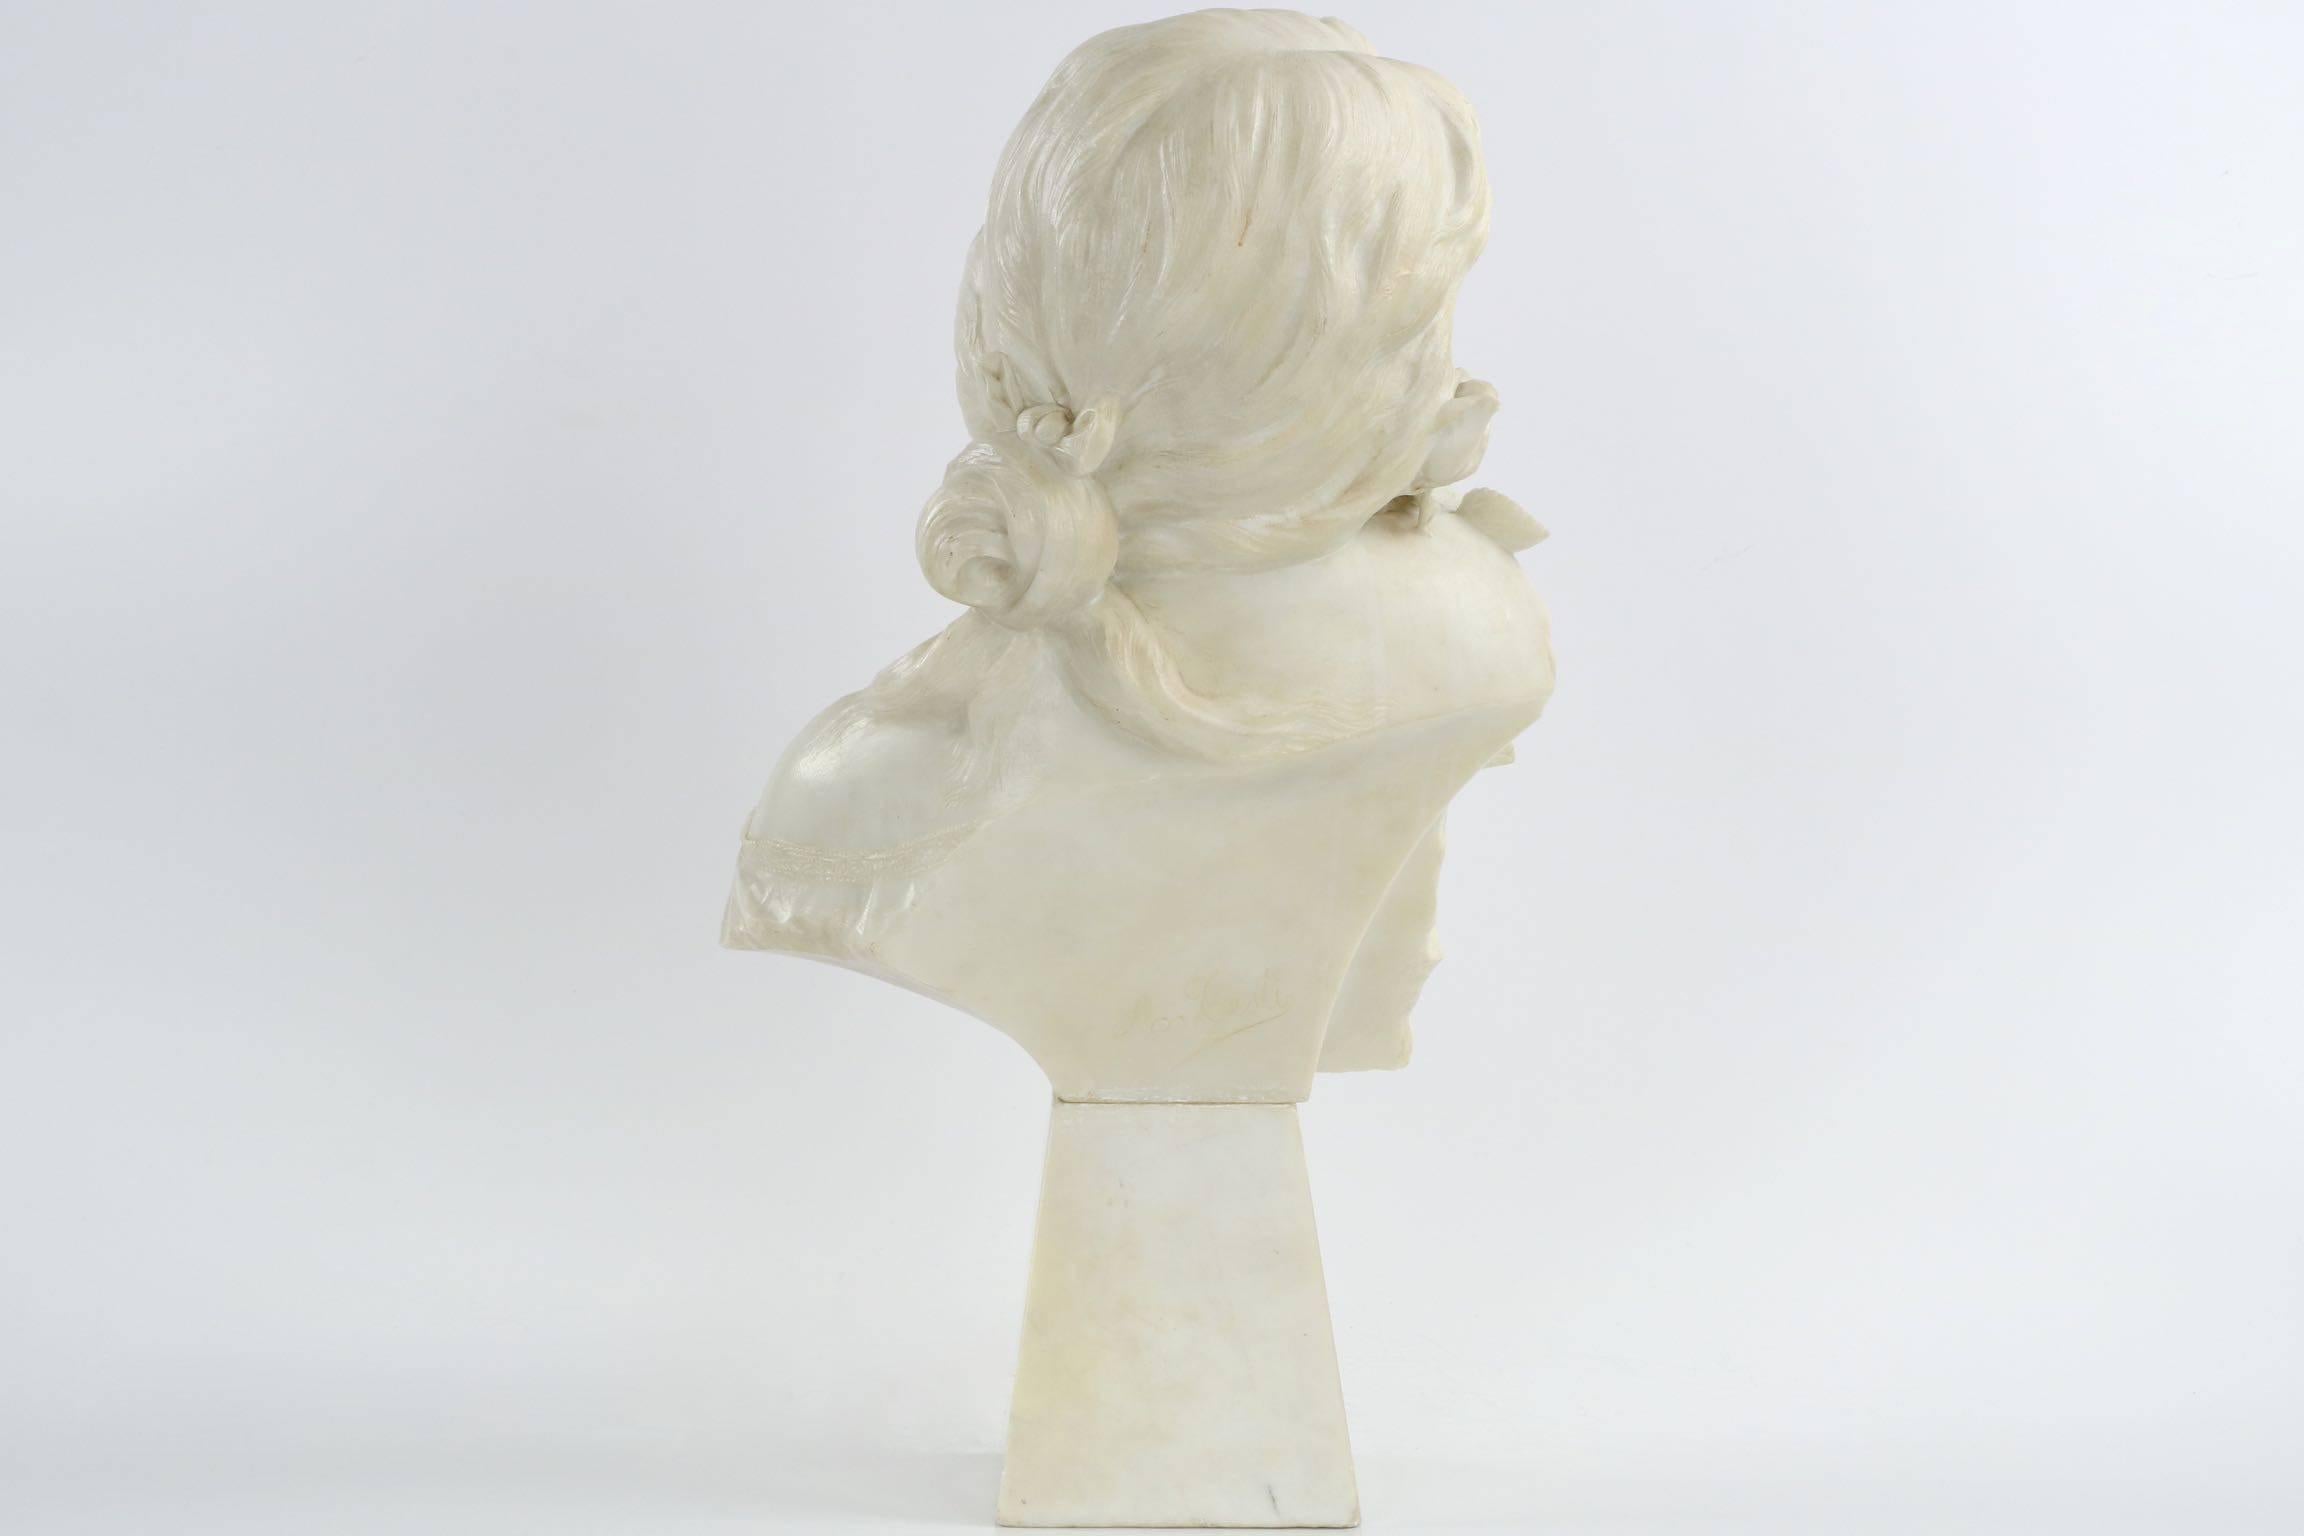 Fine Italian Antique Marble Sculpture Bust of a Young Woman Signed A. Testi 1